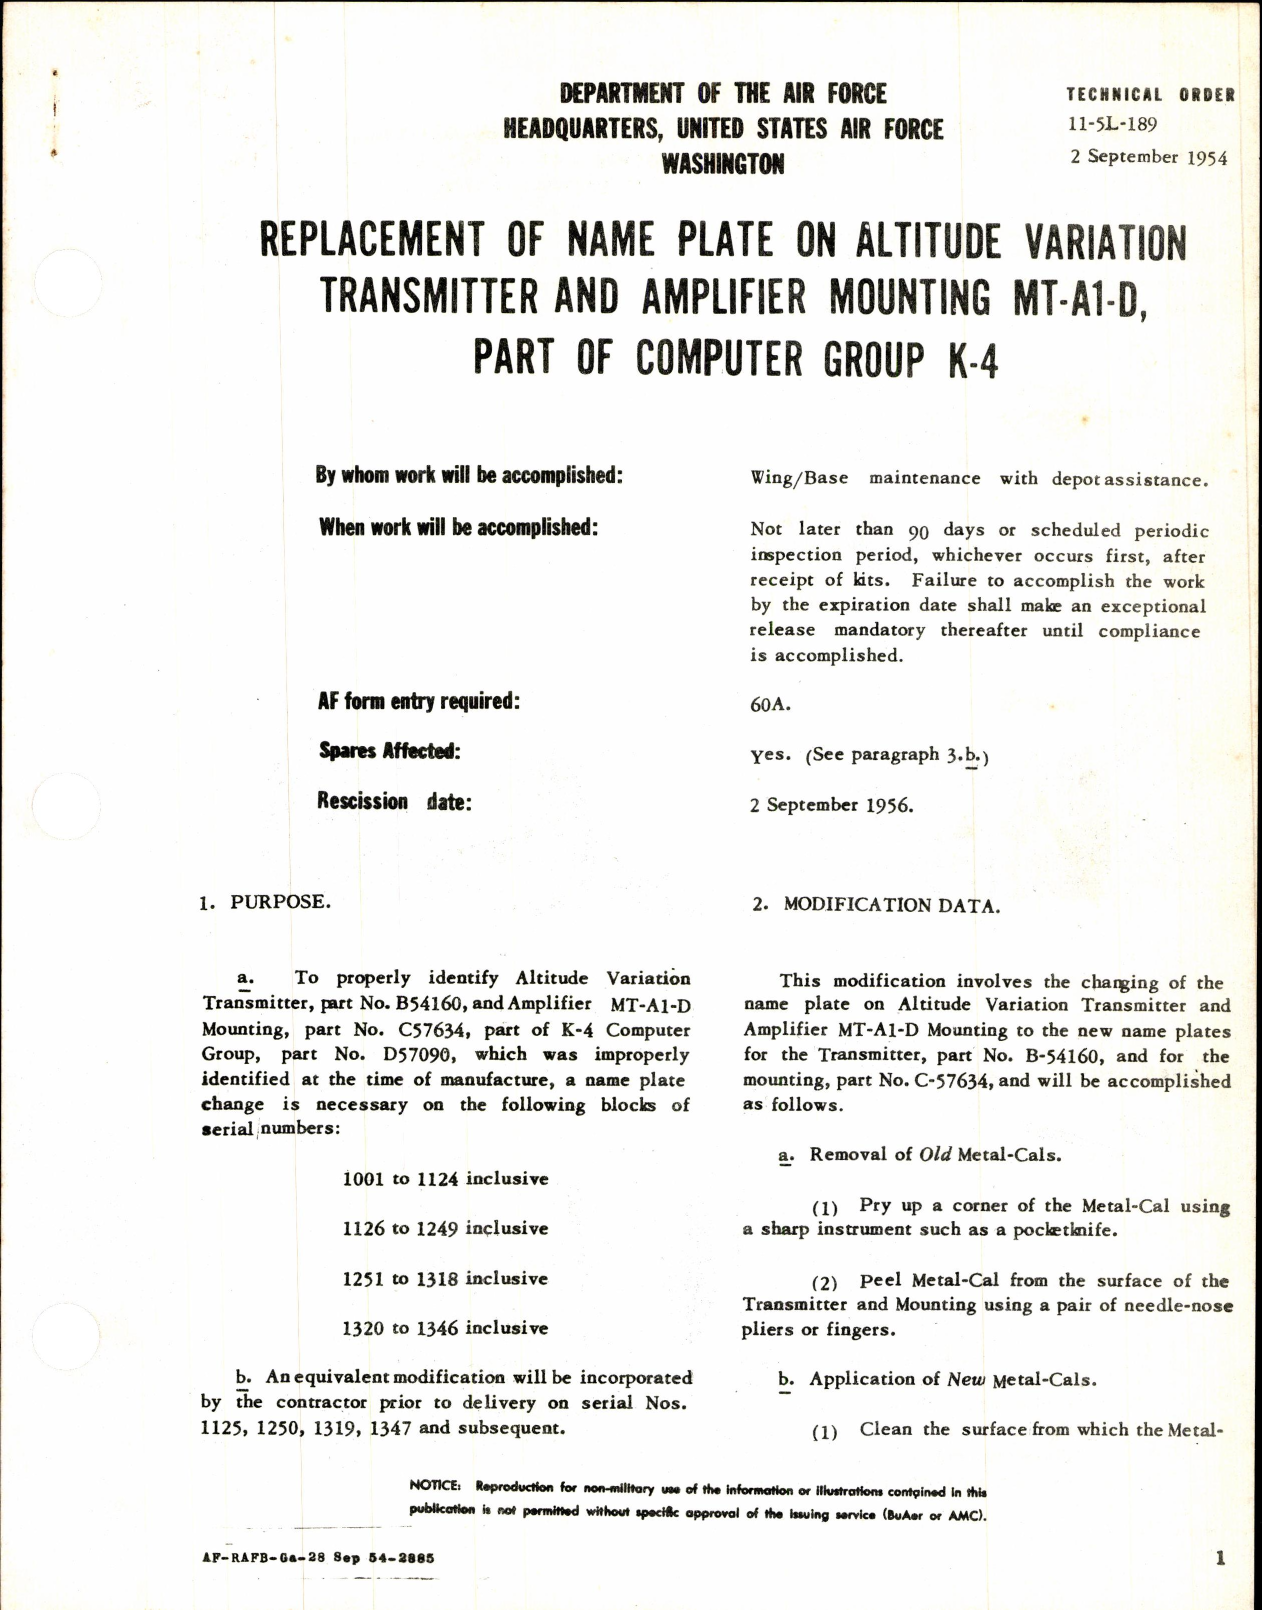 Sample page 1 from AirCorps Library document: Replacement of Name Plate on Altitude Transmitter